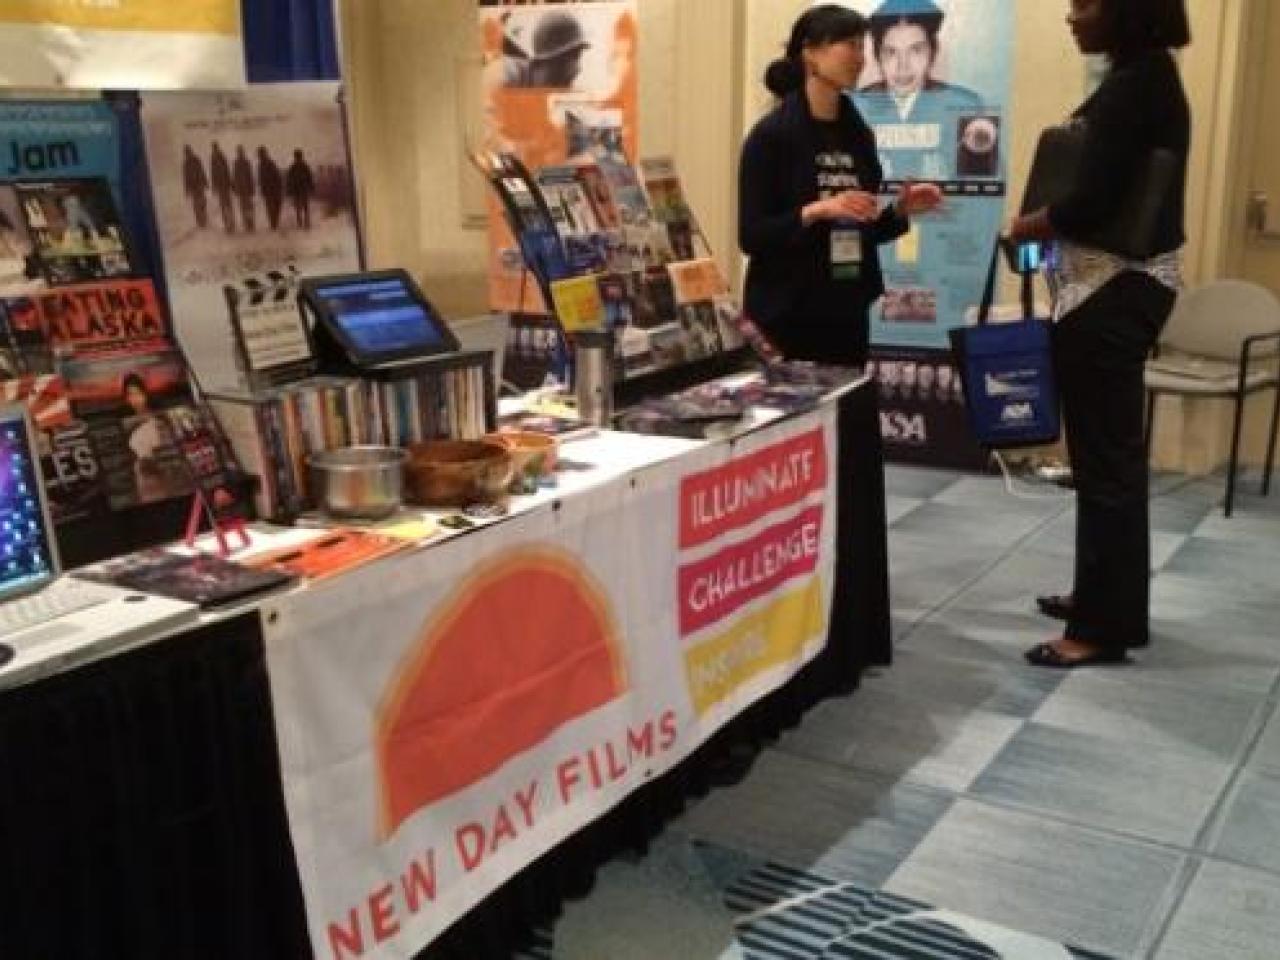 New Day filmmaker Debbie Lum converses with an attendee at the New Day exhibition booth filled New Day films promotional materials and a laptop to screen trailers.